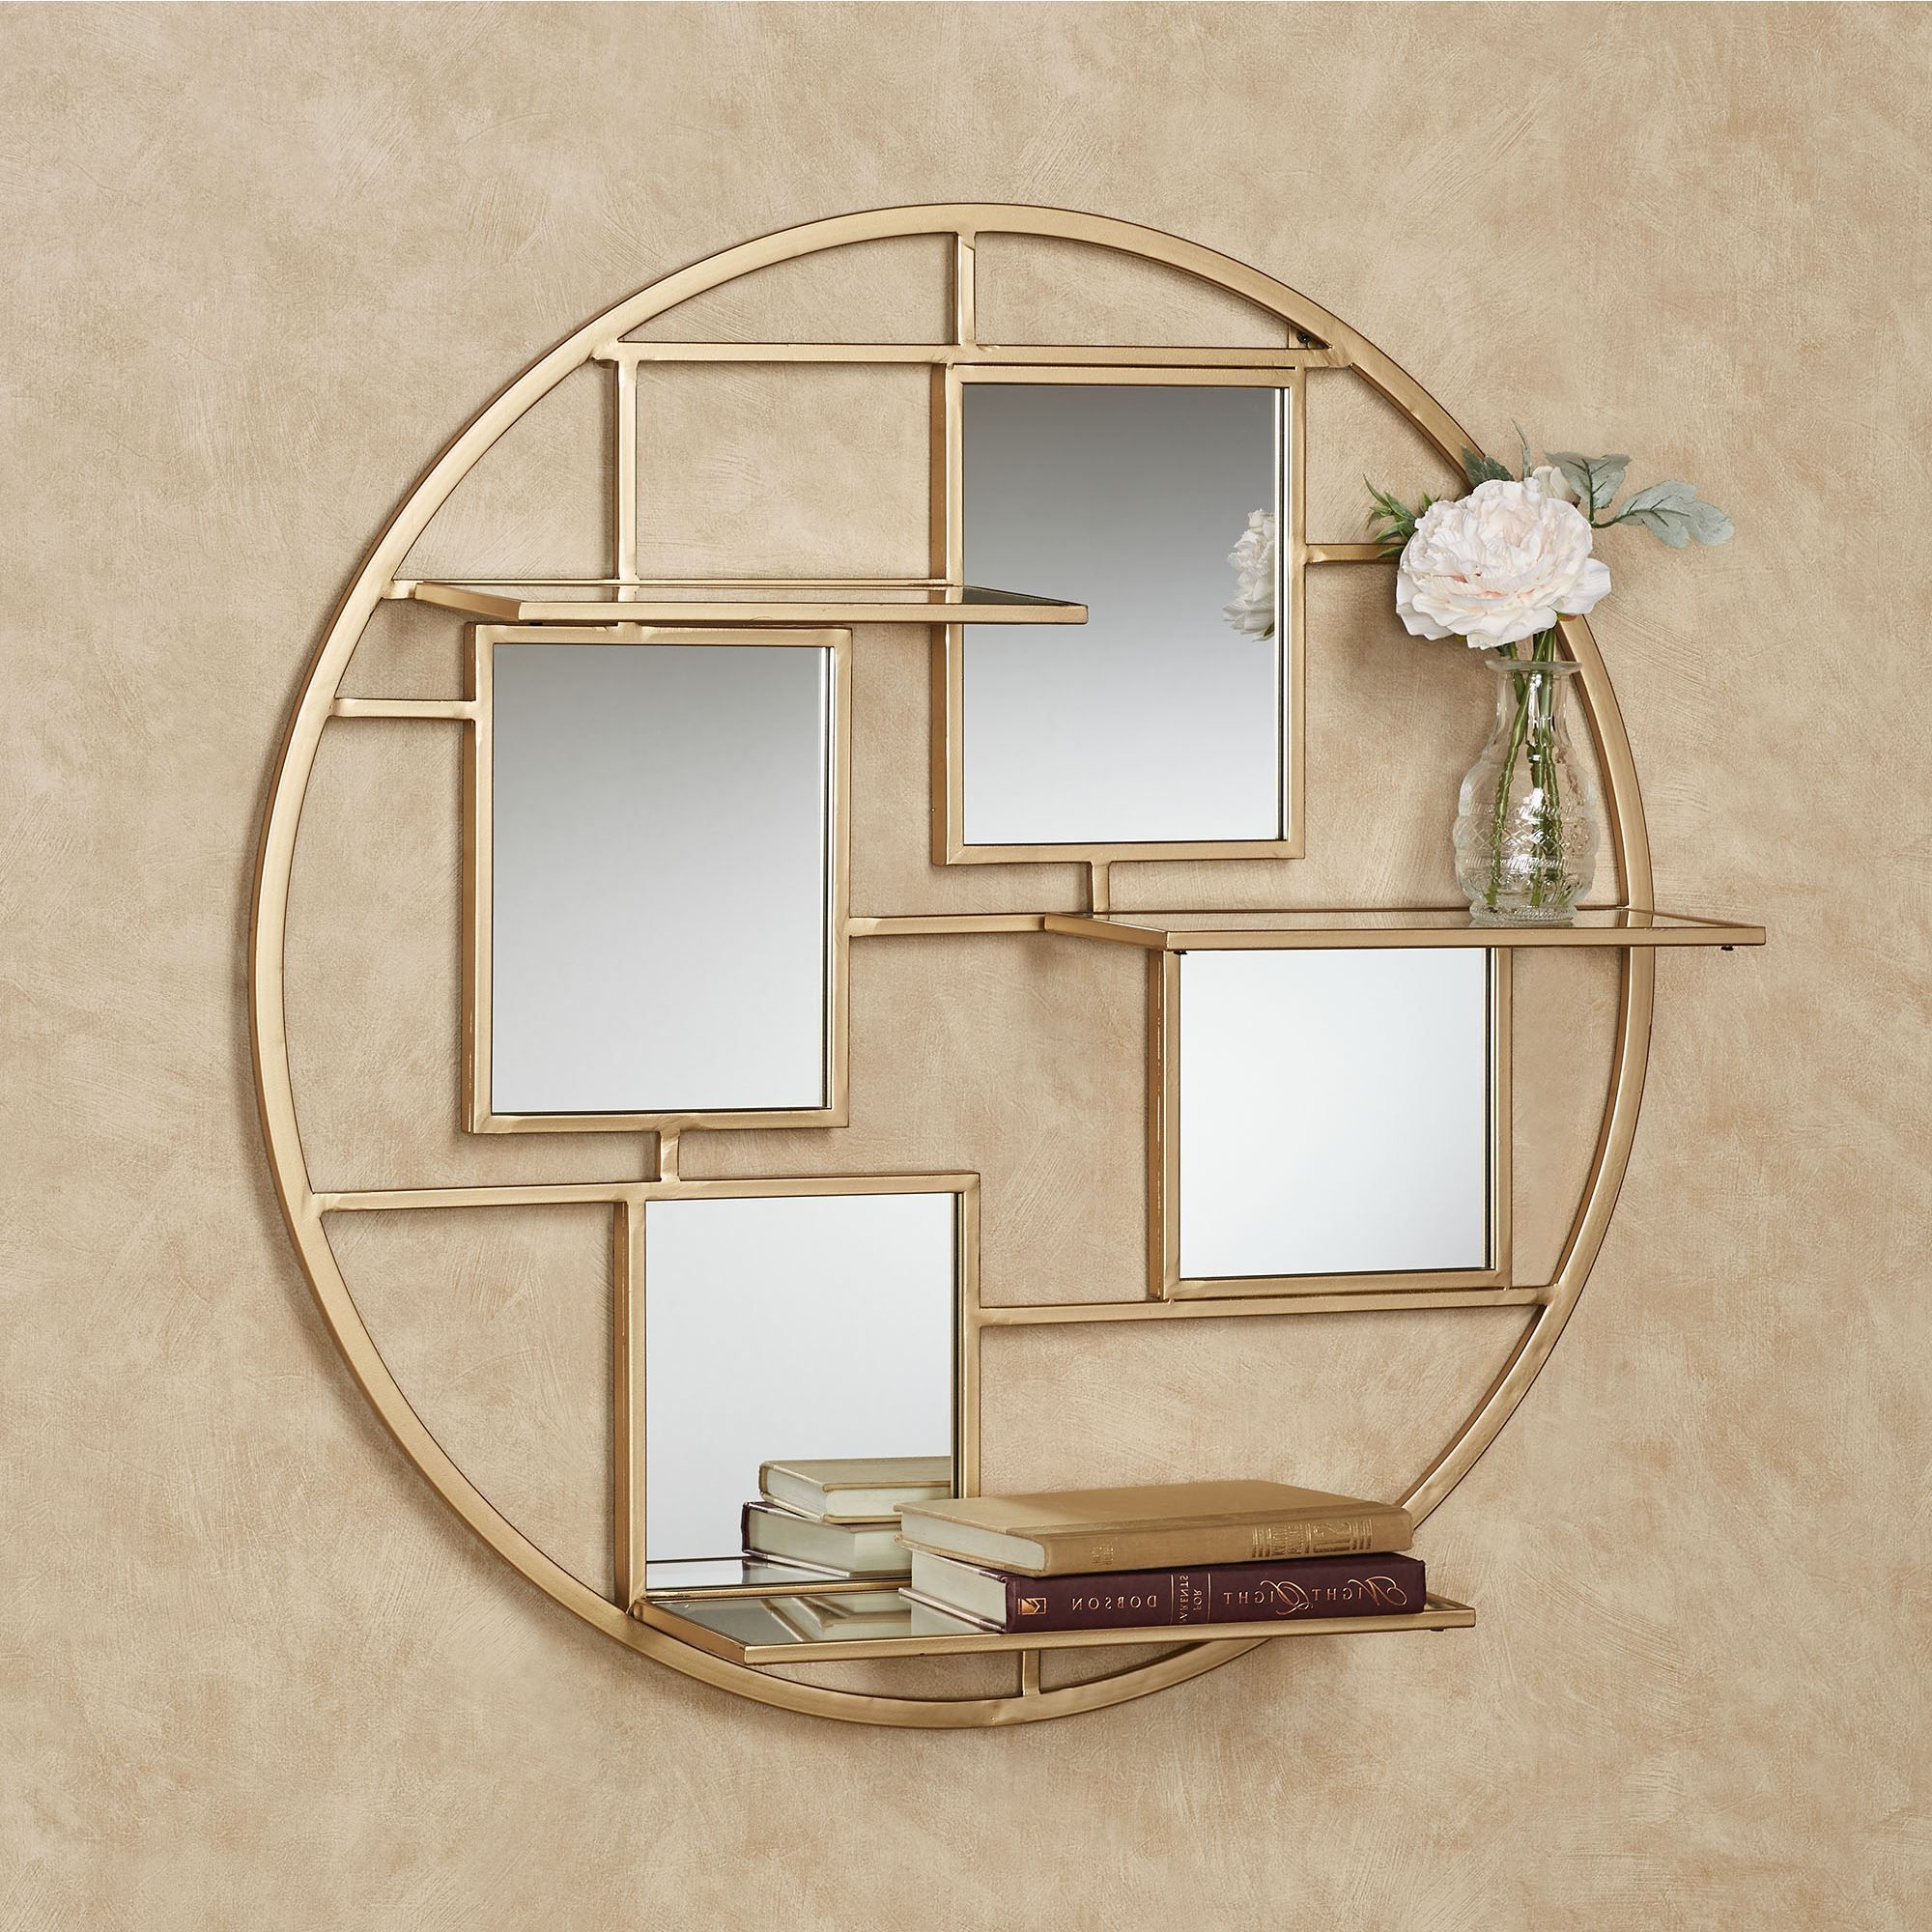 Brioni Gold Metal Mirrored Wall Art Shelf With Famous Gold Fan Metal Wall Art (View 12 of 15)